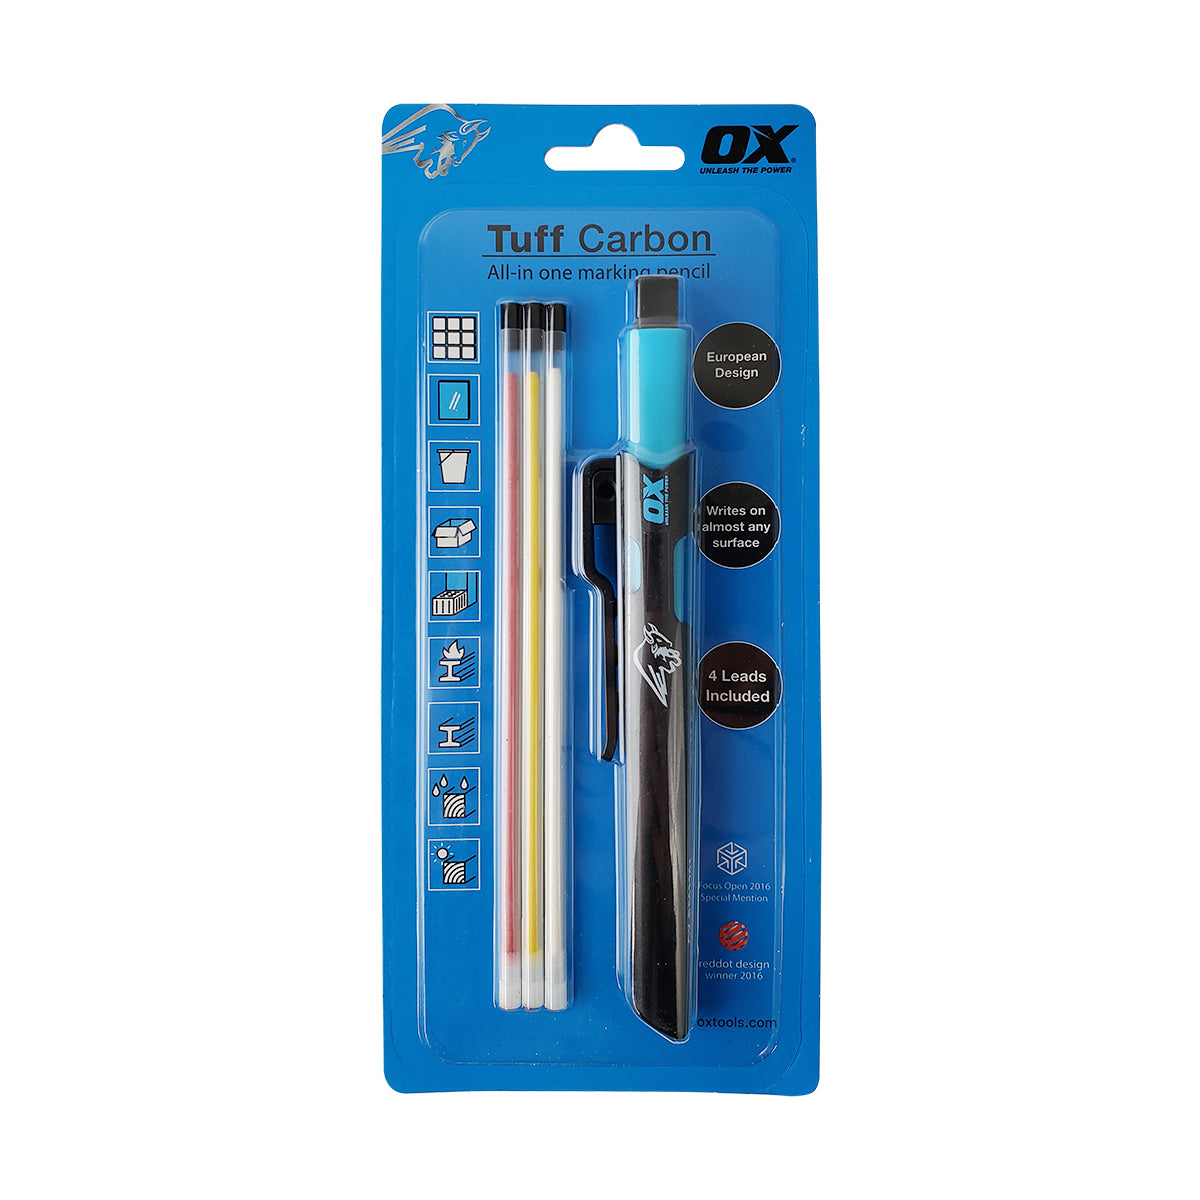 Tuff Carbon Marking Pencil Value Pack | 4 Leads Included - OX Tools